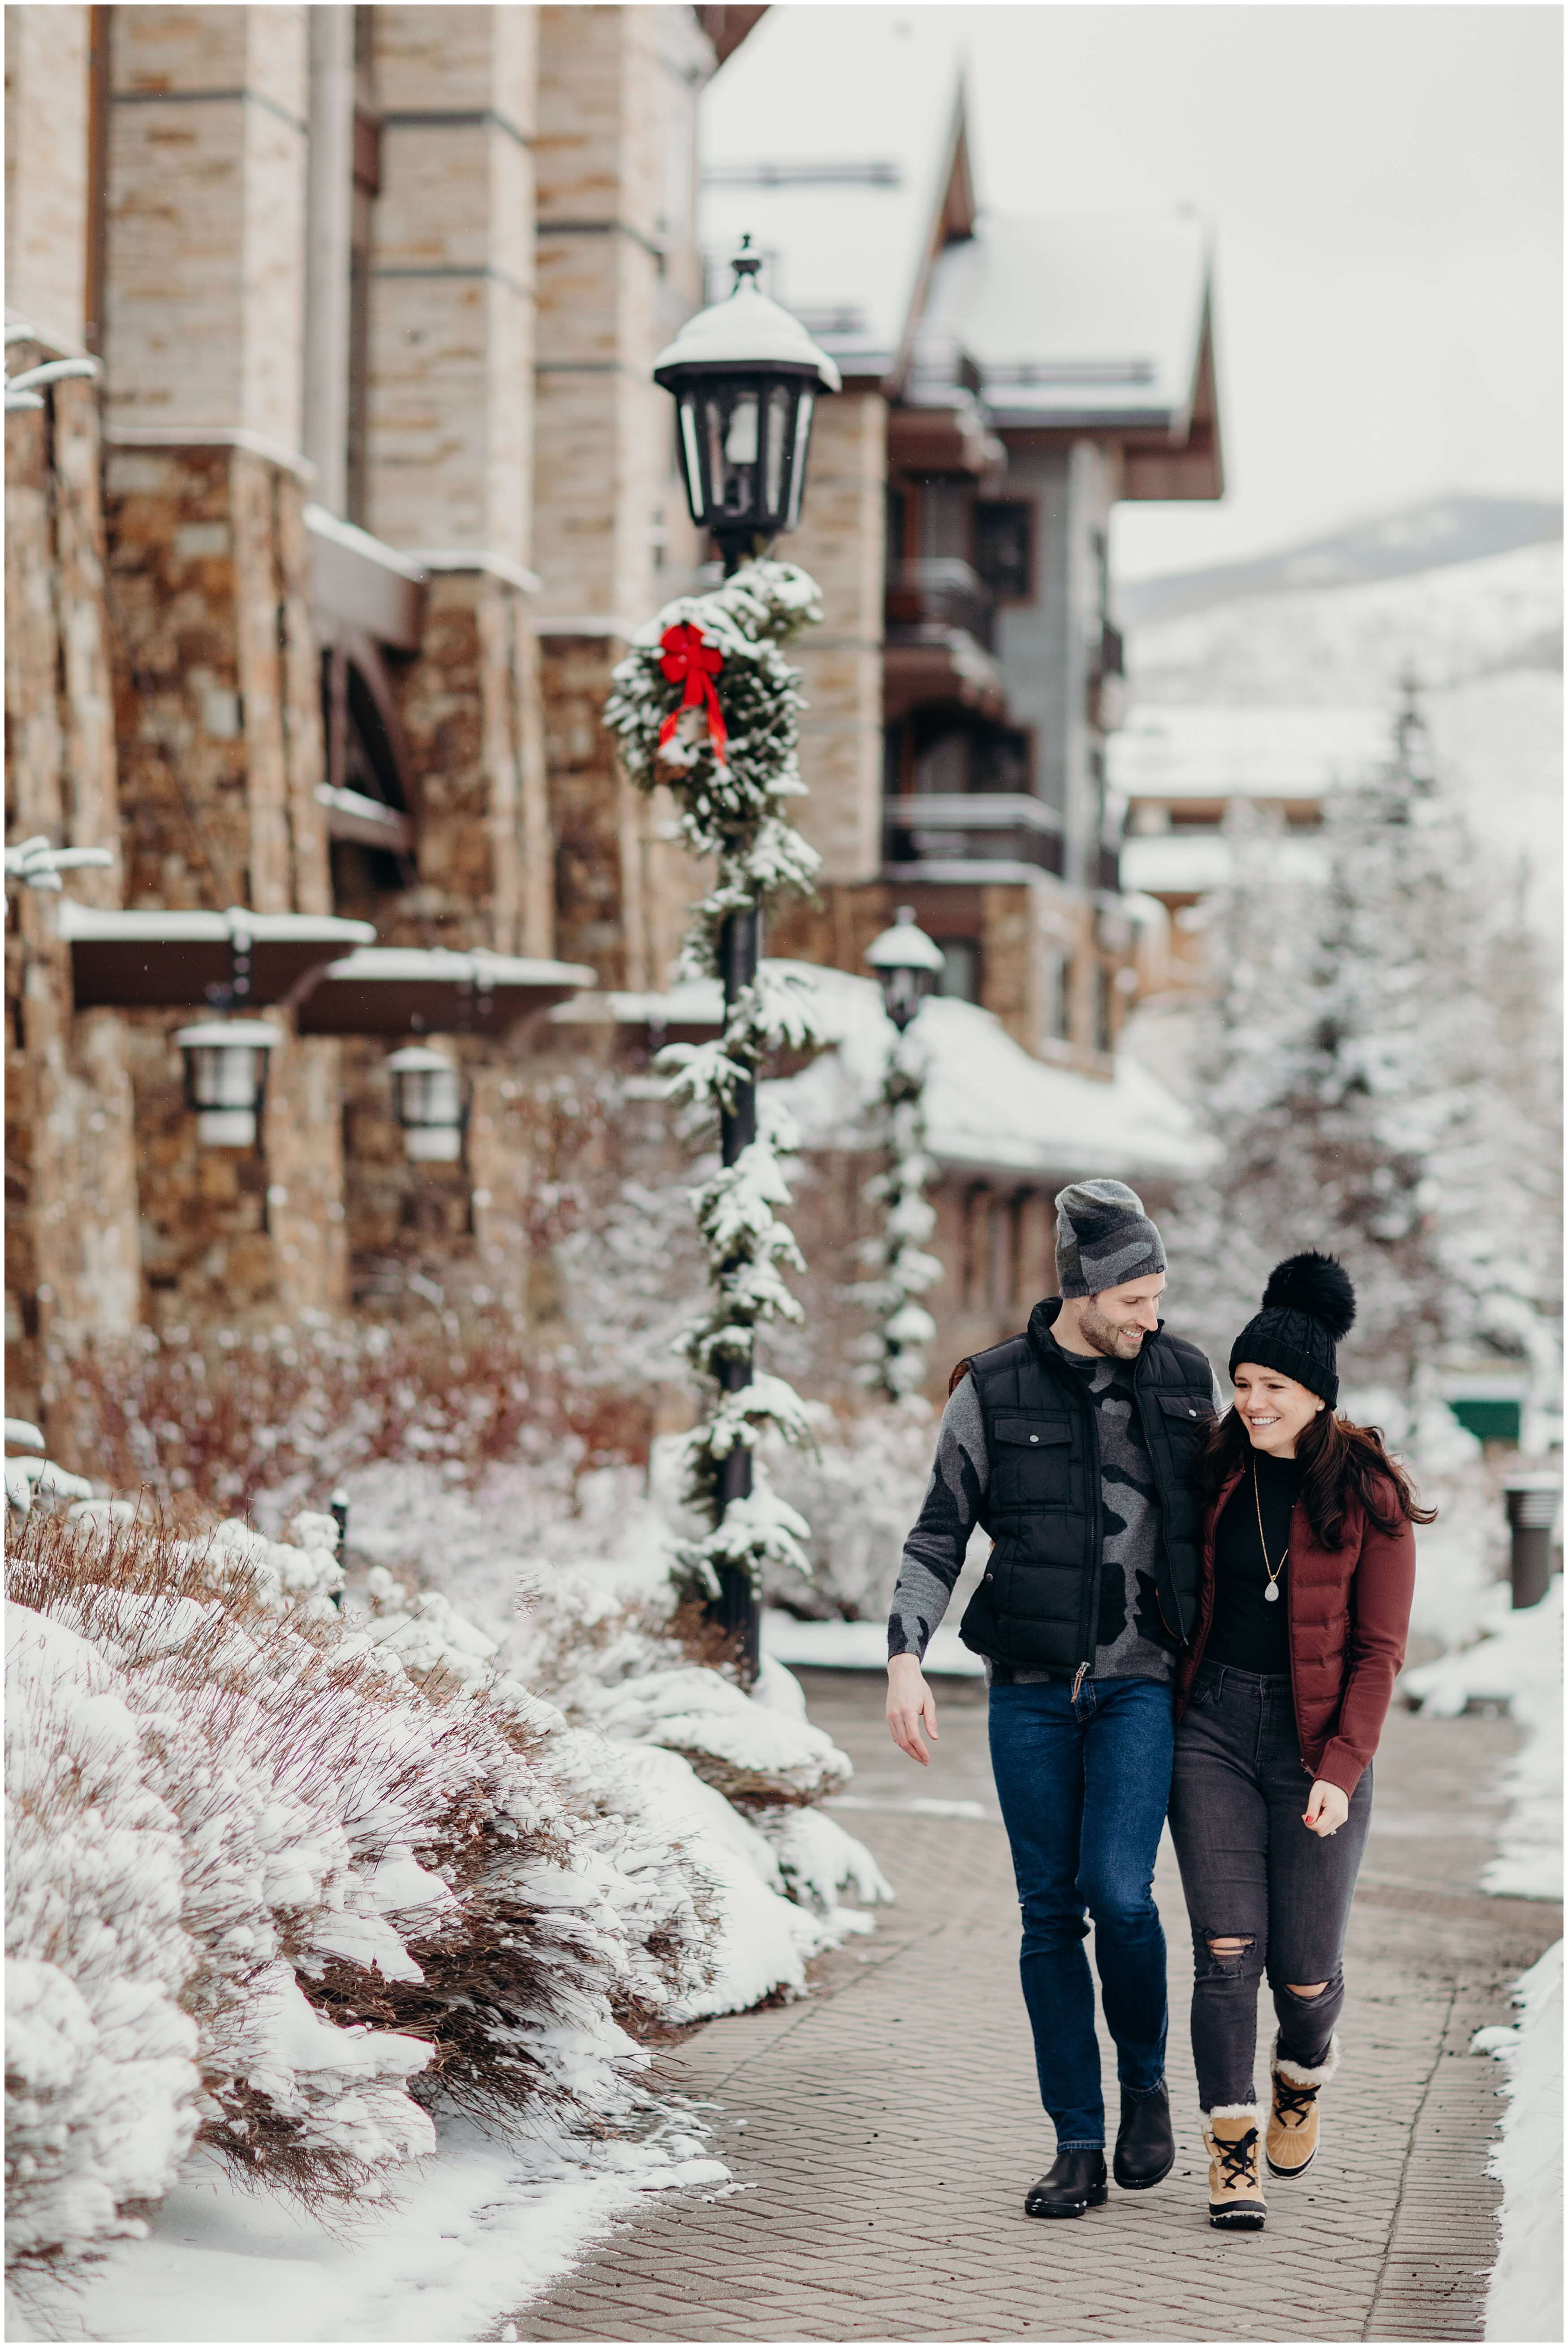 engagement photos in Vail, Vail engagement photographer, Vail wedding photographer, mountain engagement photos Colorado, Colorado engagement photos, Colorado engagement photographer, Denver engagement photographer, mountain photos Colorado, Vail village, Vail in winter, winter engagement photos Colorado